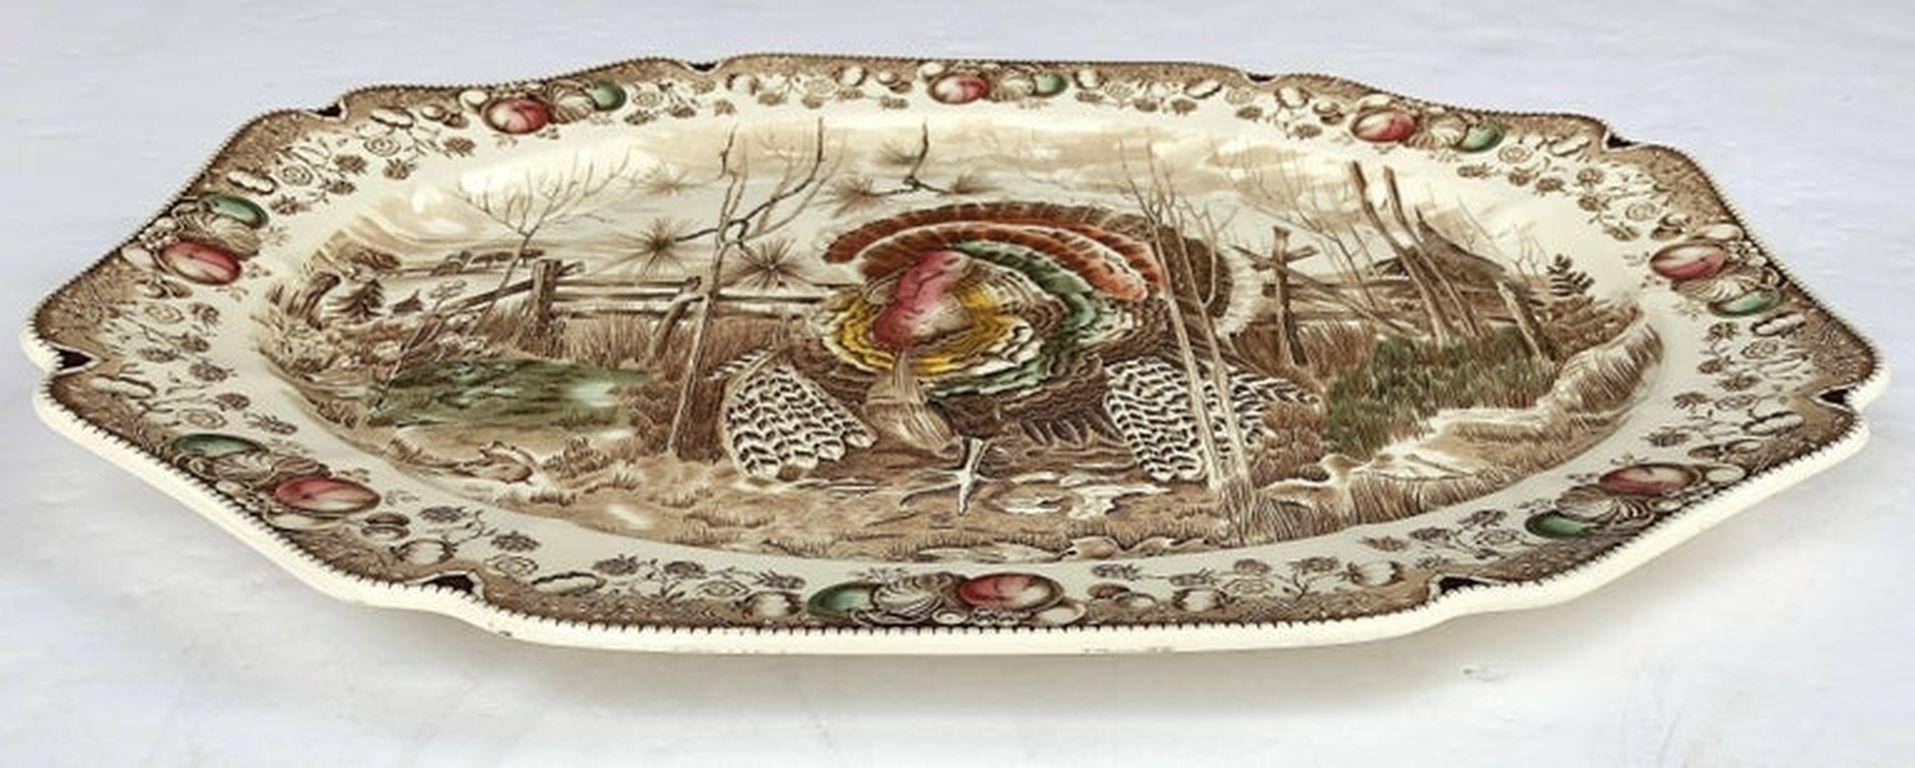 A large vintage serving platter featuring the Wild Turkey, his majesty brown and white transfer-ware pattern by the celebrated English pottery firm, Johnson Brothers.

With authentic midcentury brown label on reverse.

Perfect for the Thanksgiving